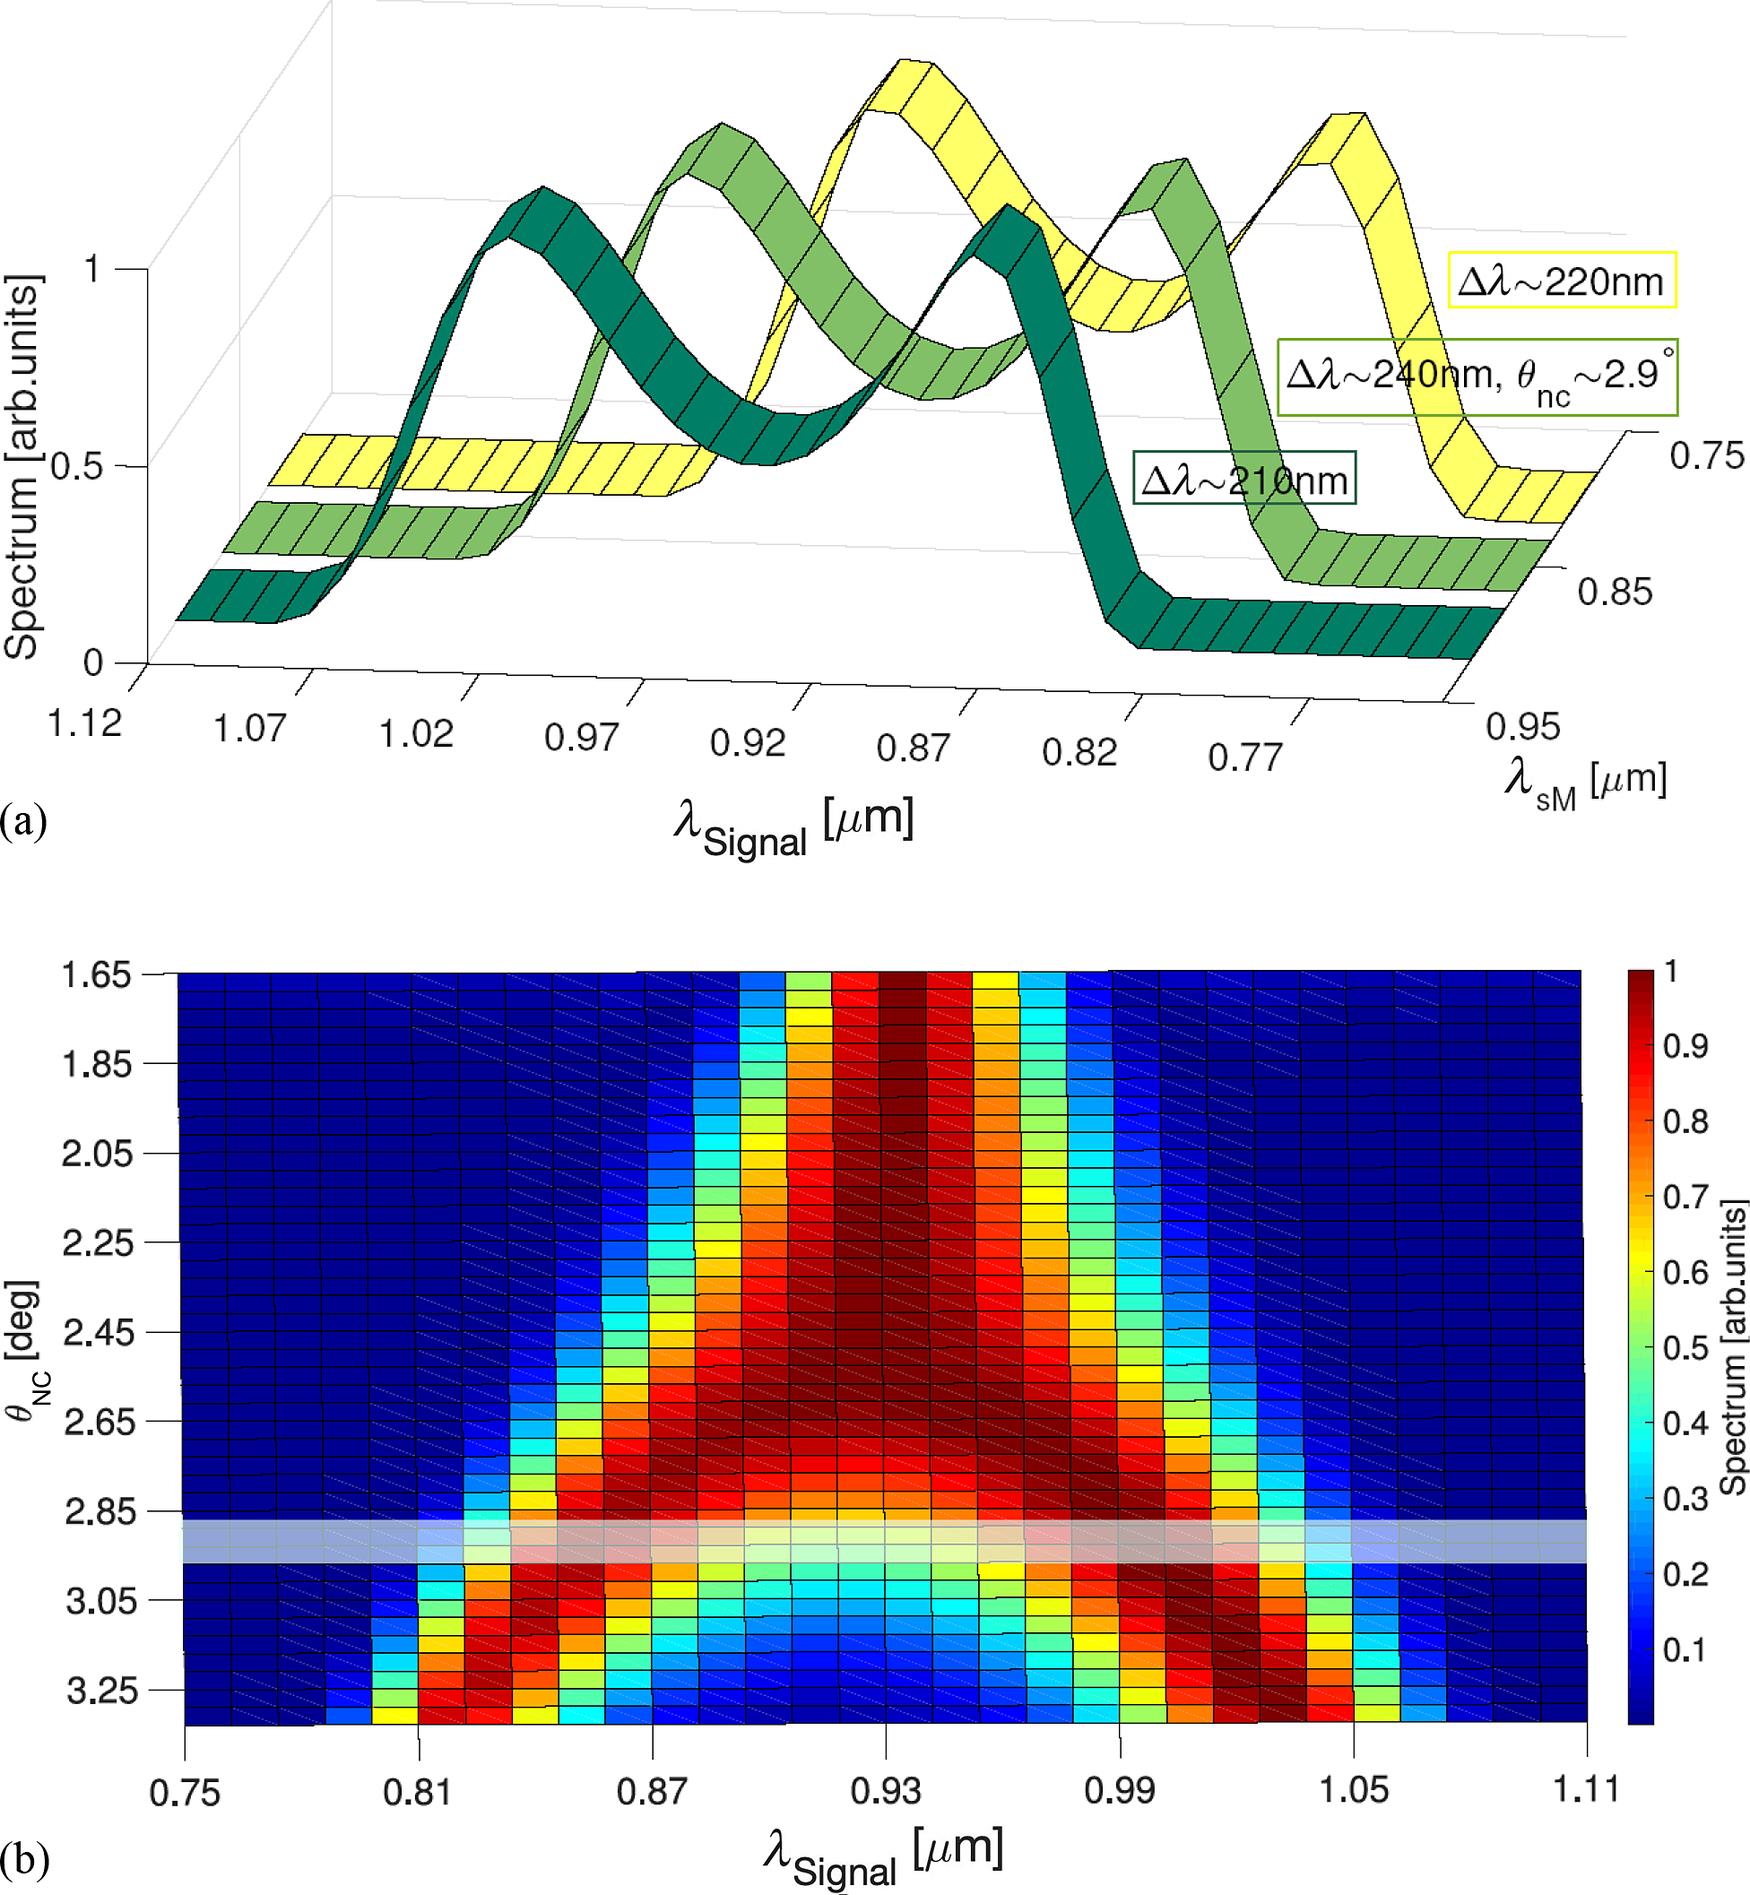 Parametric scan for the BiBO nonlinear crystal. (a) Simulated phase-matched wavelength (λsM) dependence of the amplified spectrum. The crystal thickness is 2.5 mm and the pump intensity is ~50 GW/cm2. (b) Simulated noncollinear angular dependence of the amplified spectrum over a range ~1.6. The crystal thickness is 2.5 mm and the pump intensity is ~50 GW/cm2. The box (translucent white) highlights the region of interest where the bandwidth is maximized but the central region (~0.9 μm) is not heavily depleted.